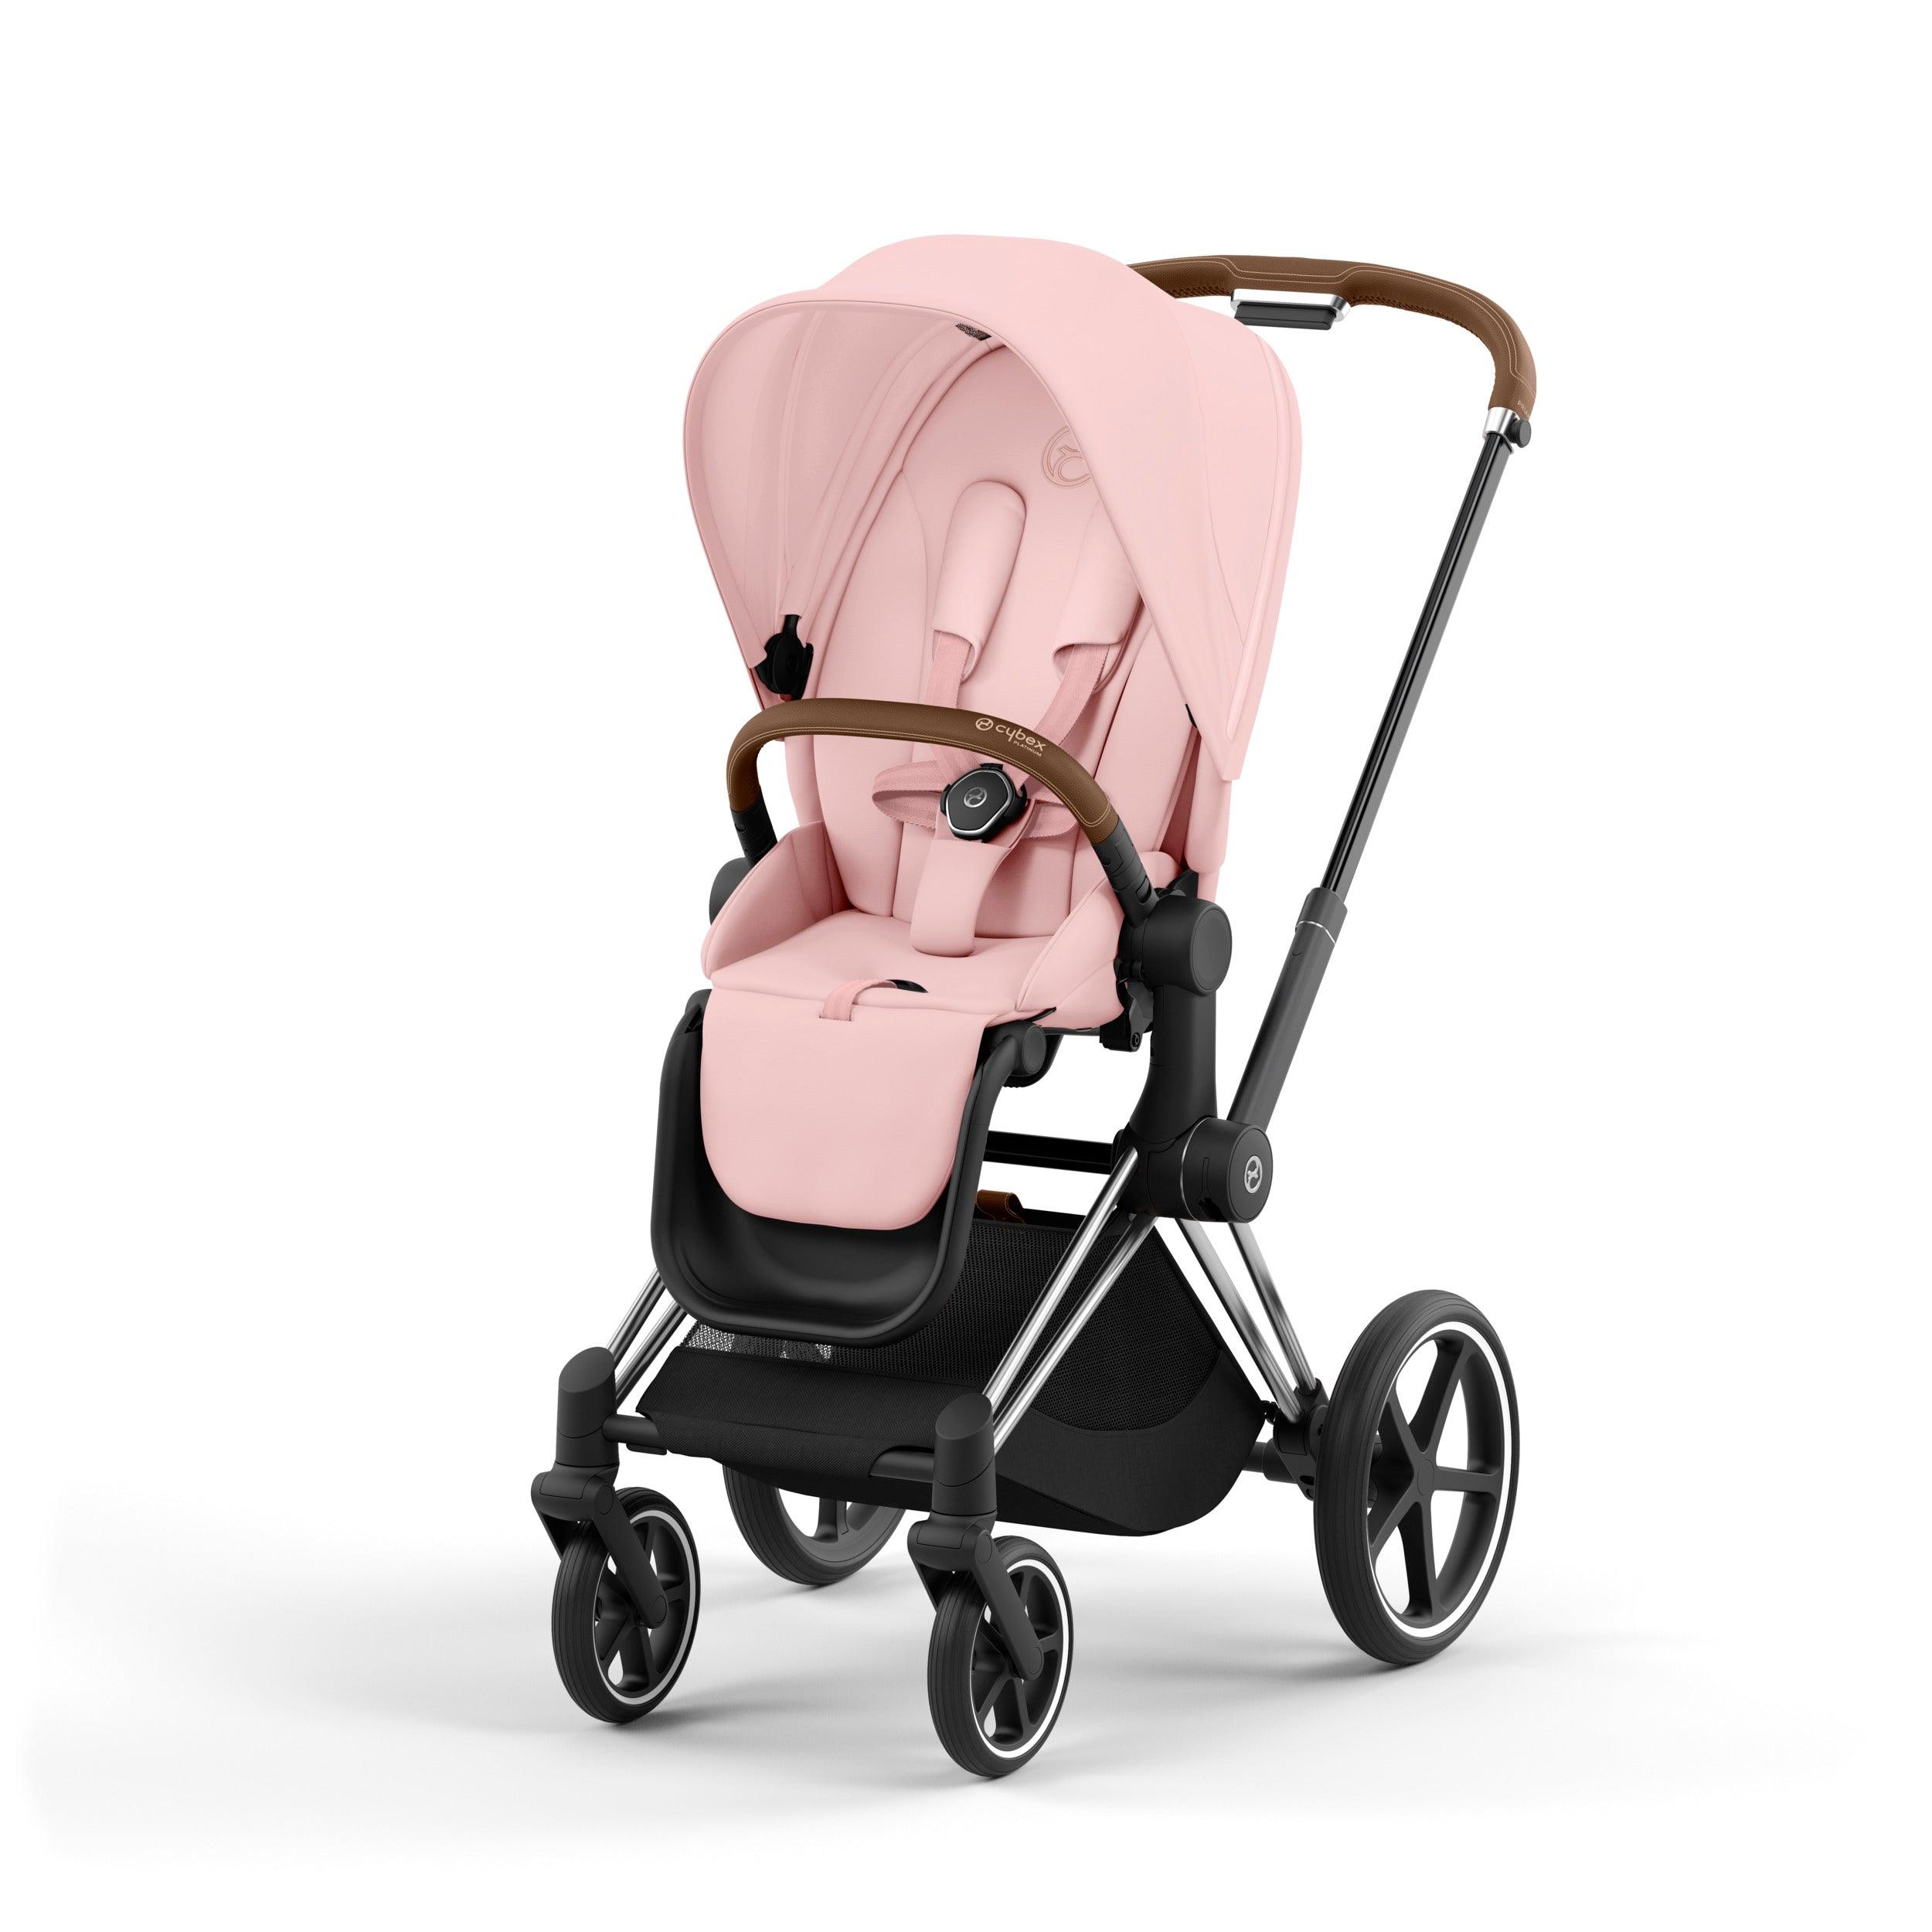 CYBEX Priam Baby Stroller in Peach Pink & Chrome Brown frame